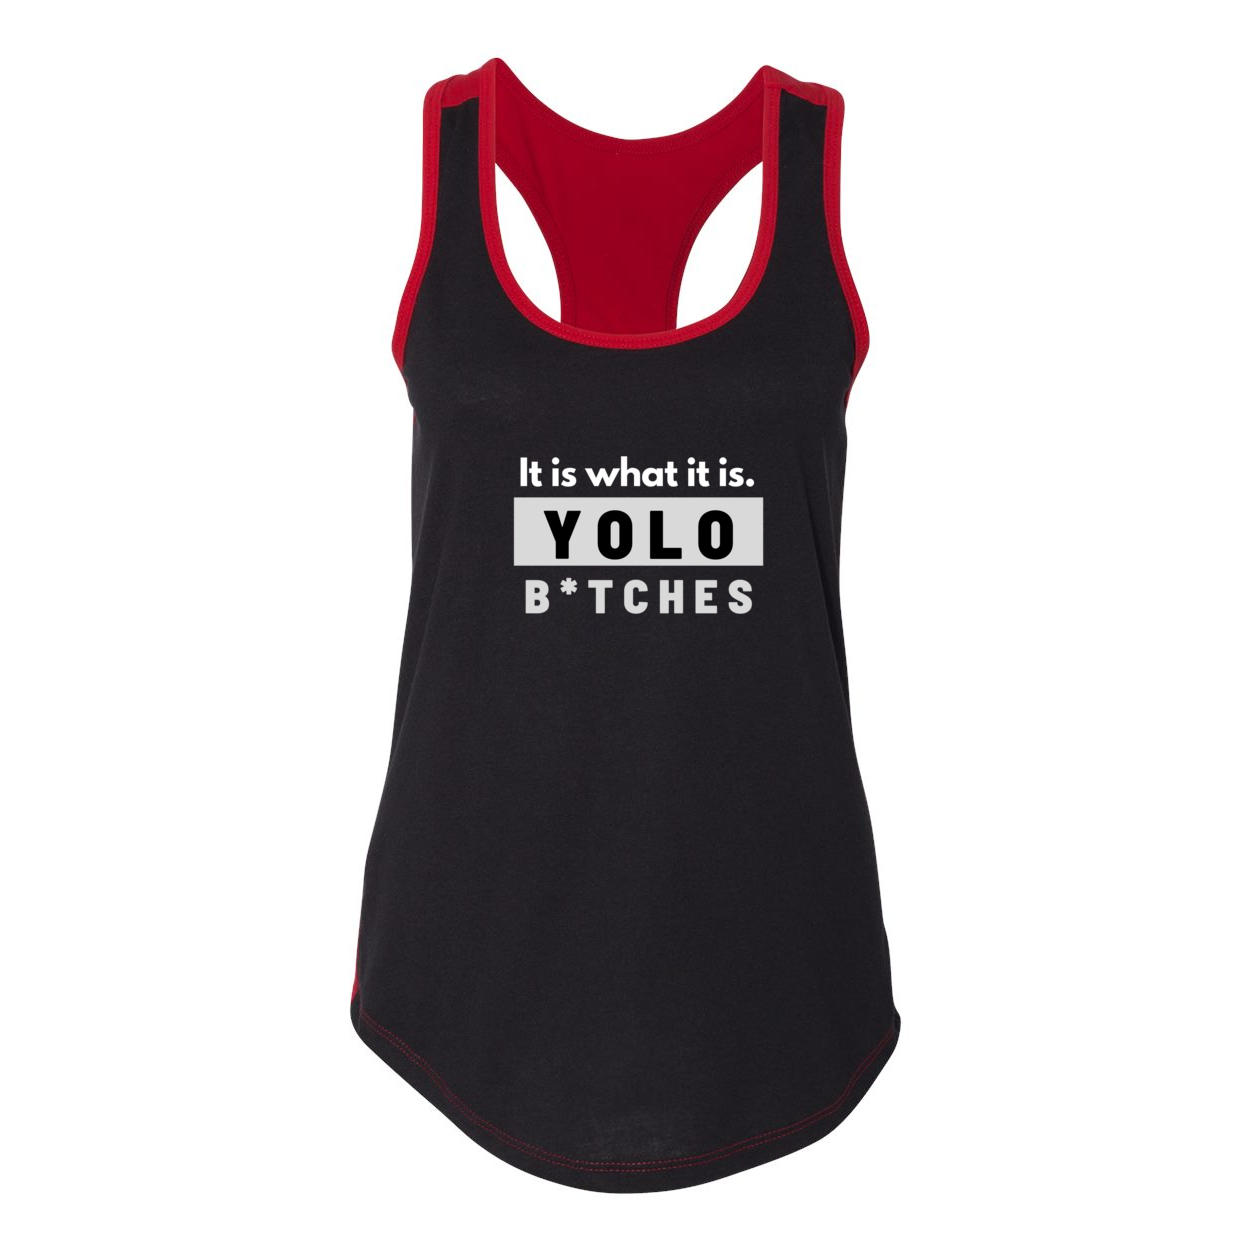 YOLO FITTED's " YOLO B*TCHES, IT IS WHAT IT IS" COLOR BLOCK RACER BACK TANK